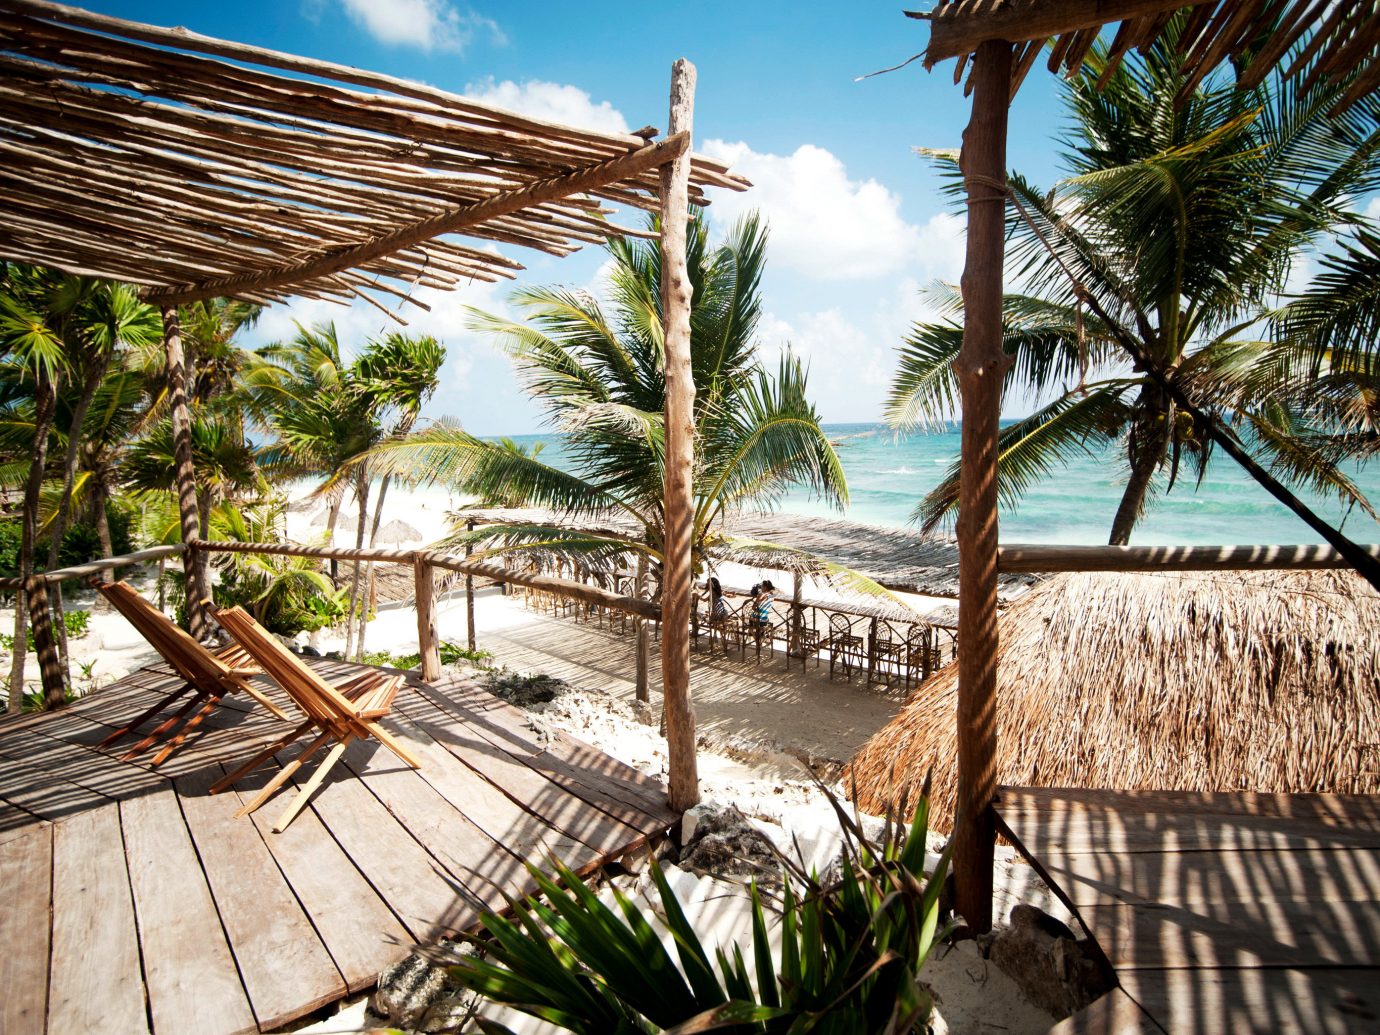 Beachfront Eco Hotels Island Patio Solo Travel Trip Ideas tree outdoor bed Resort property plant palm vacation wooden arecales Beach tropics estate walkway palm family caribbean park Jungle area Garden colorful sunny furniture bushes surrounded shade